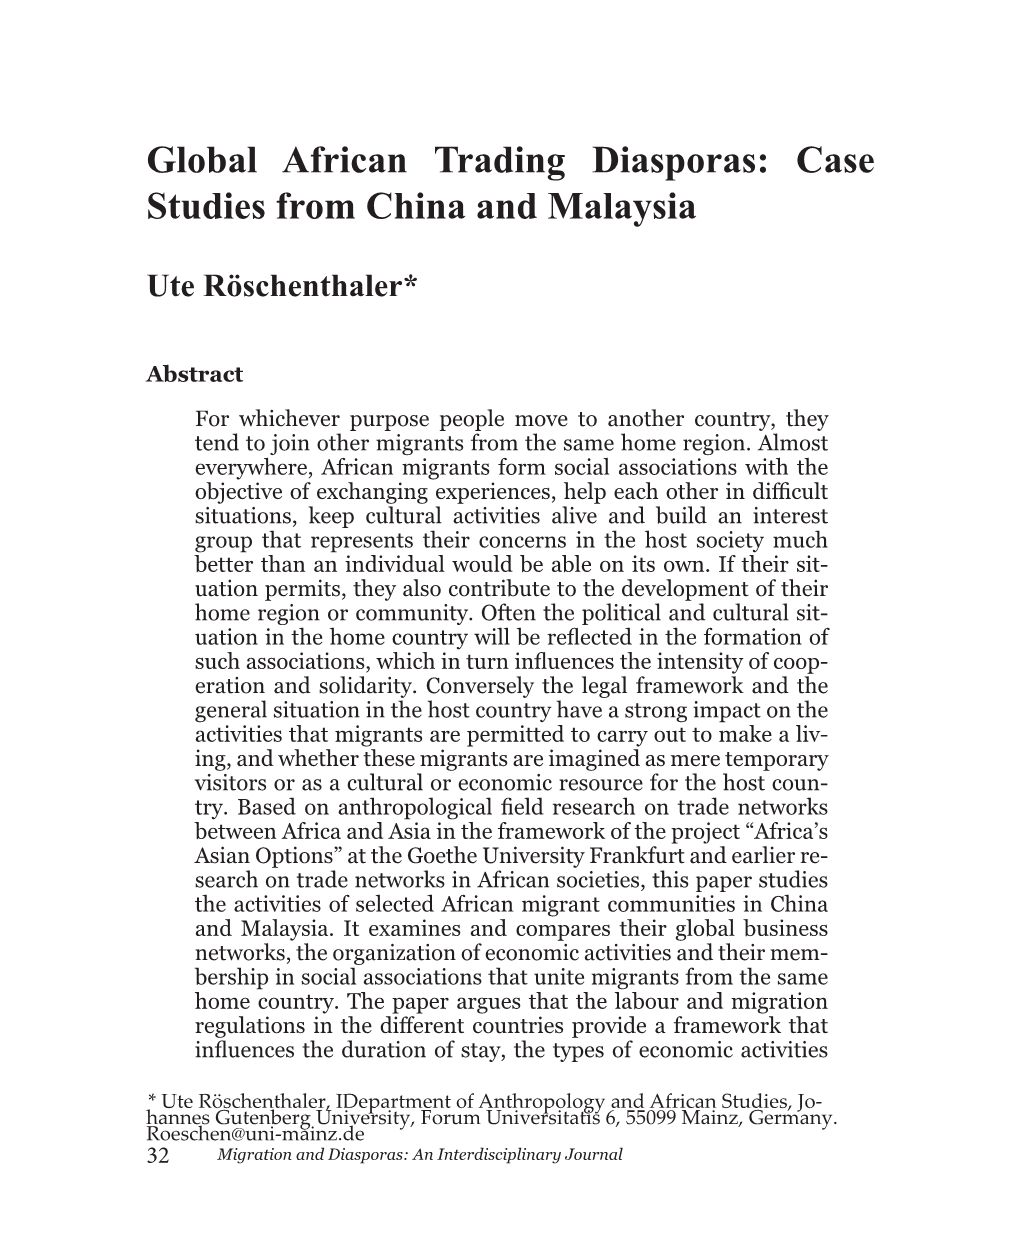 Global African Trading Diasporas: Case Studies from China and Malaysia